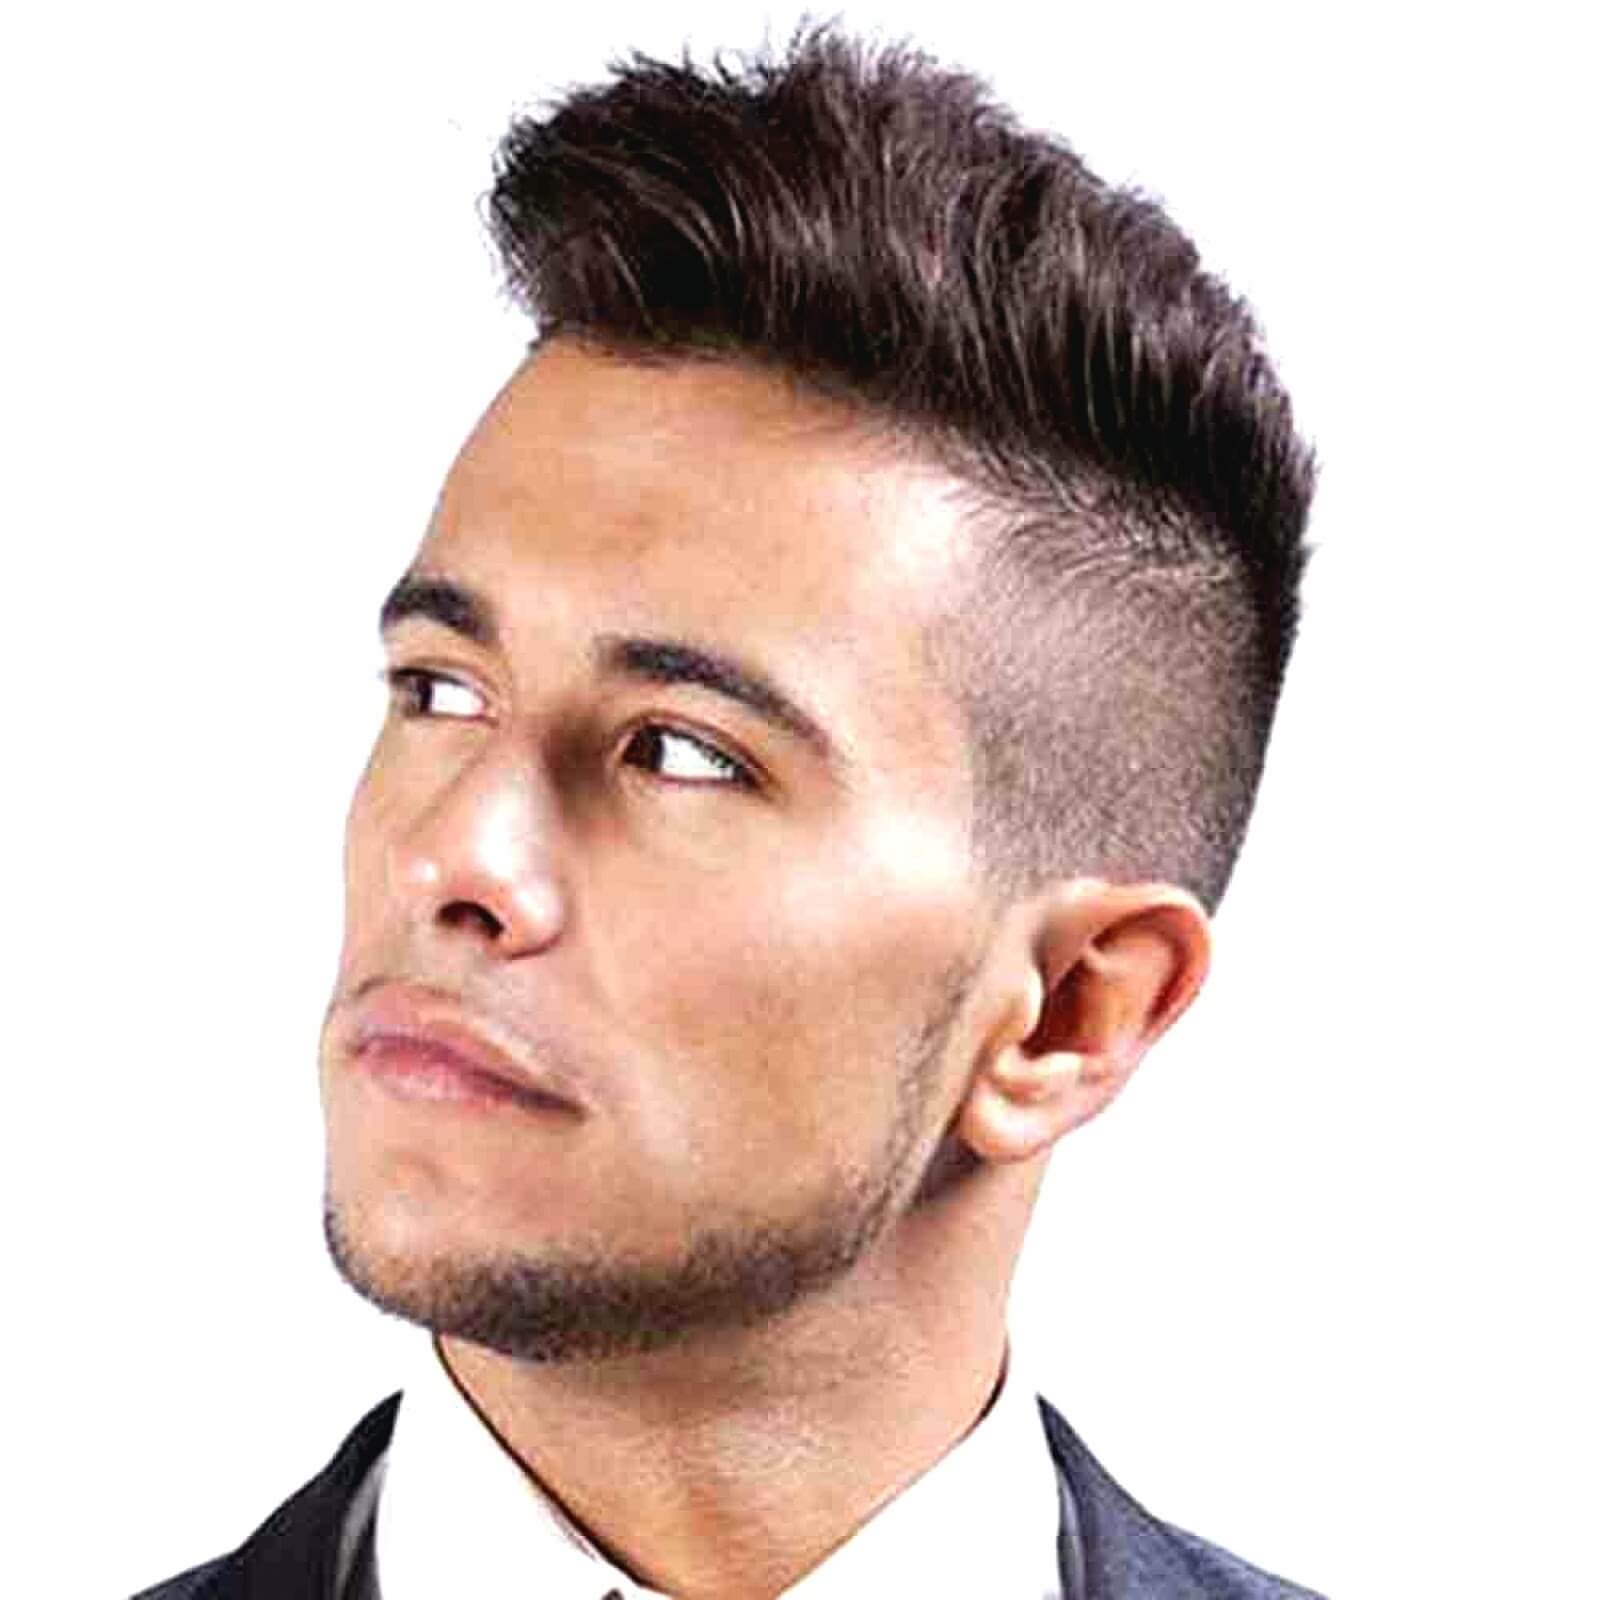 Slick Back Hair with Fewer Fades Hairstyle For Men